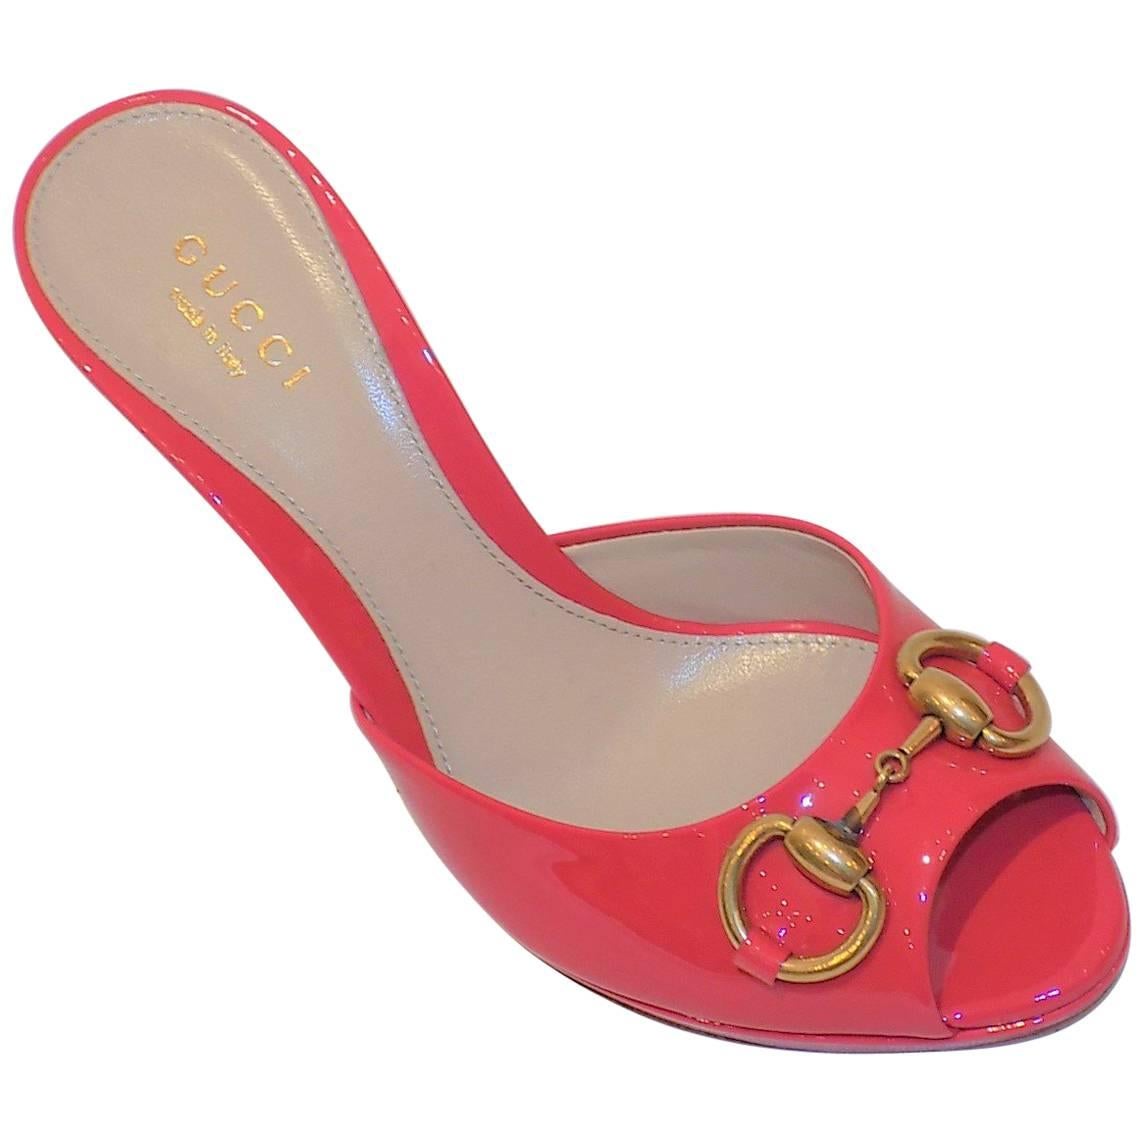 Gucci  Sandals Shoes HOLLYWOOD Pink Patent Leather Heels Slides Sz 35 NIB For Sale